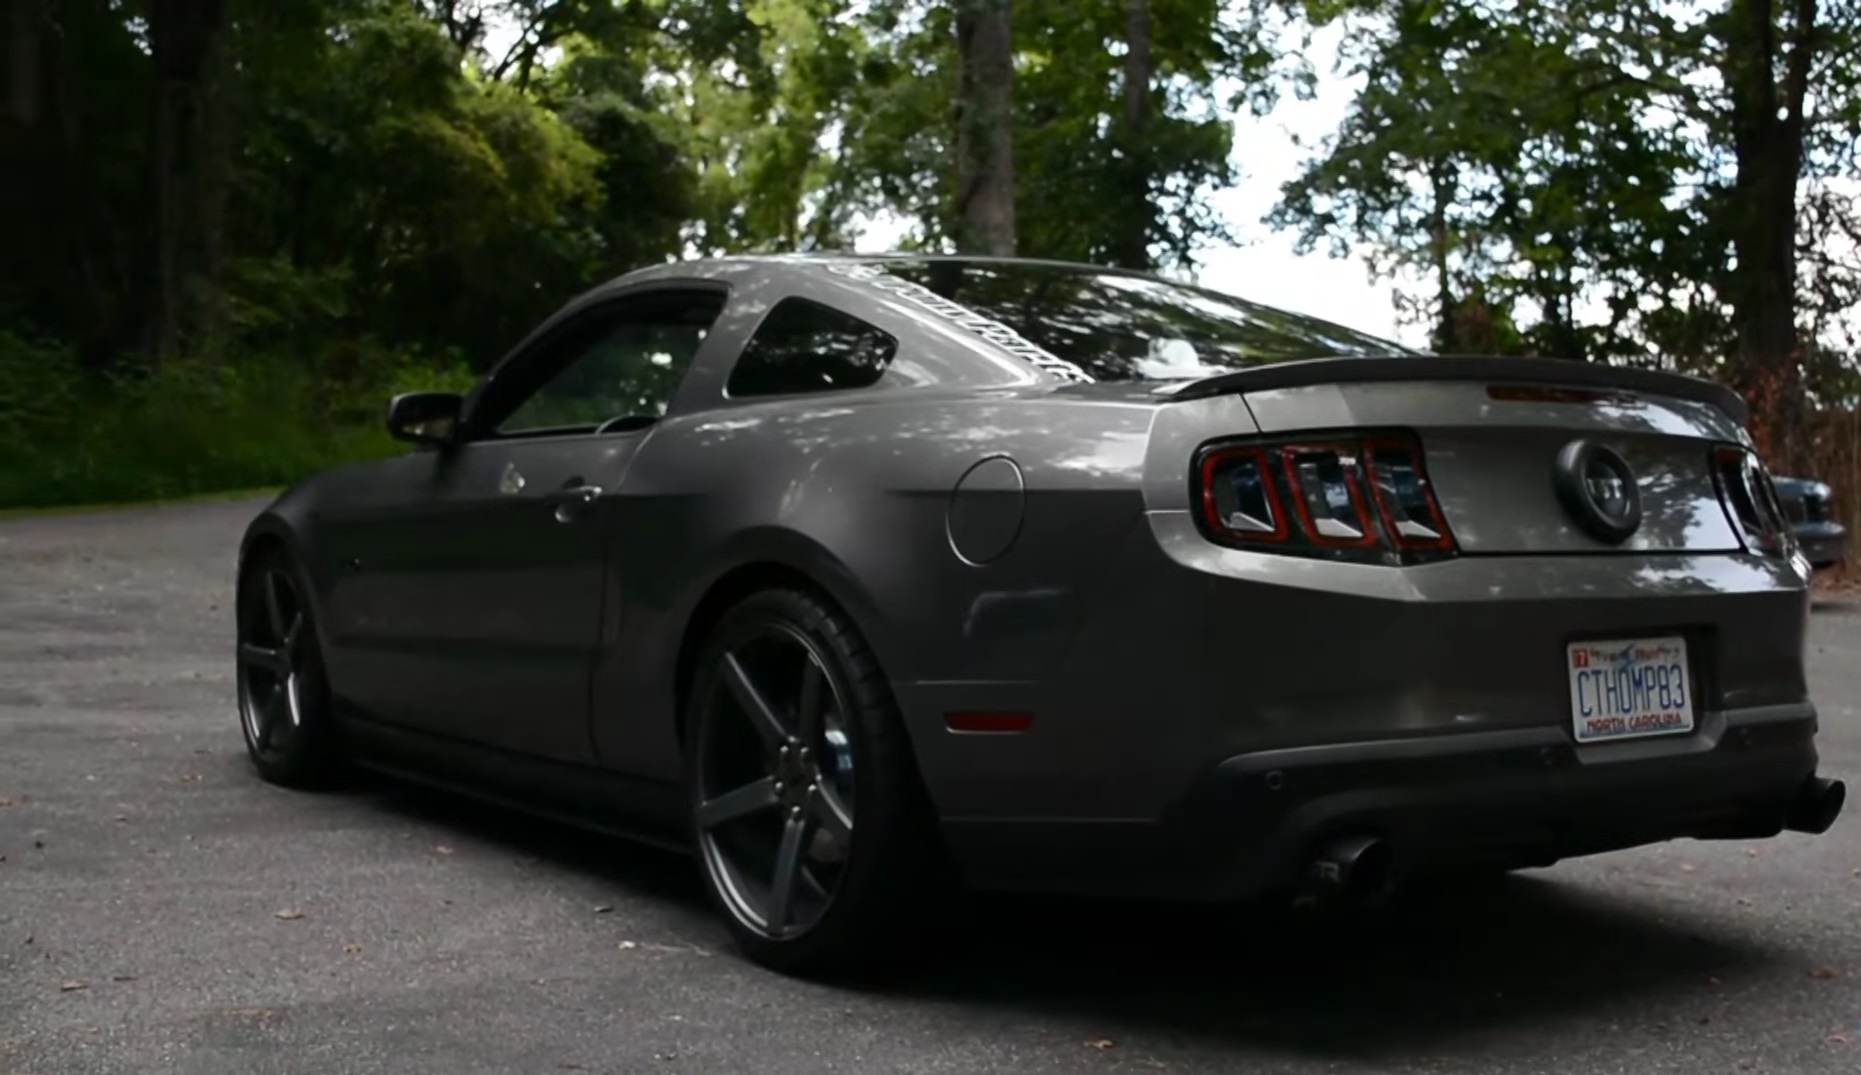 Video: 2012 Mustang GT 5.0 Review